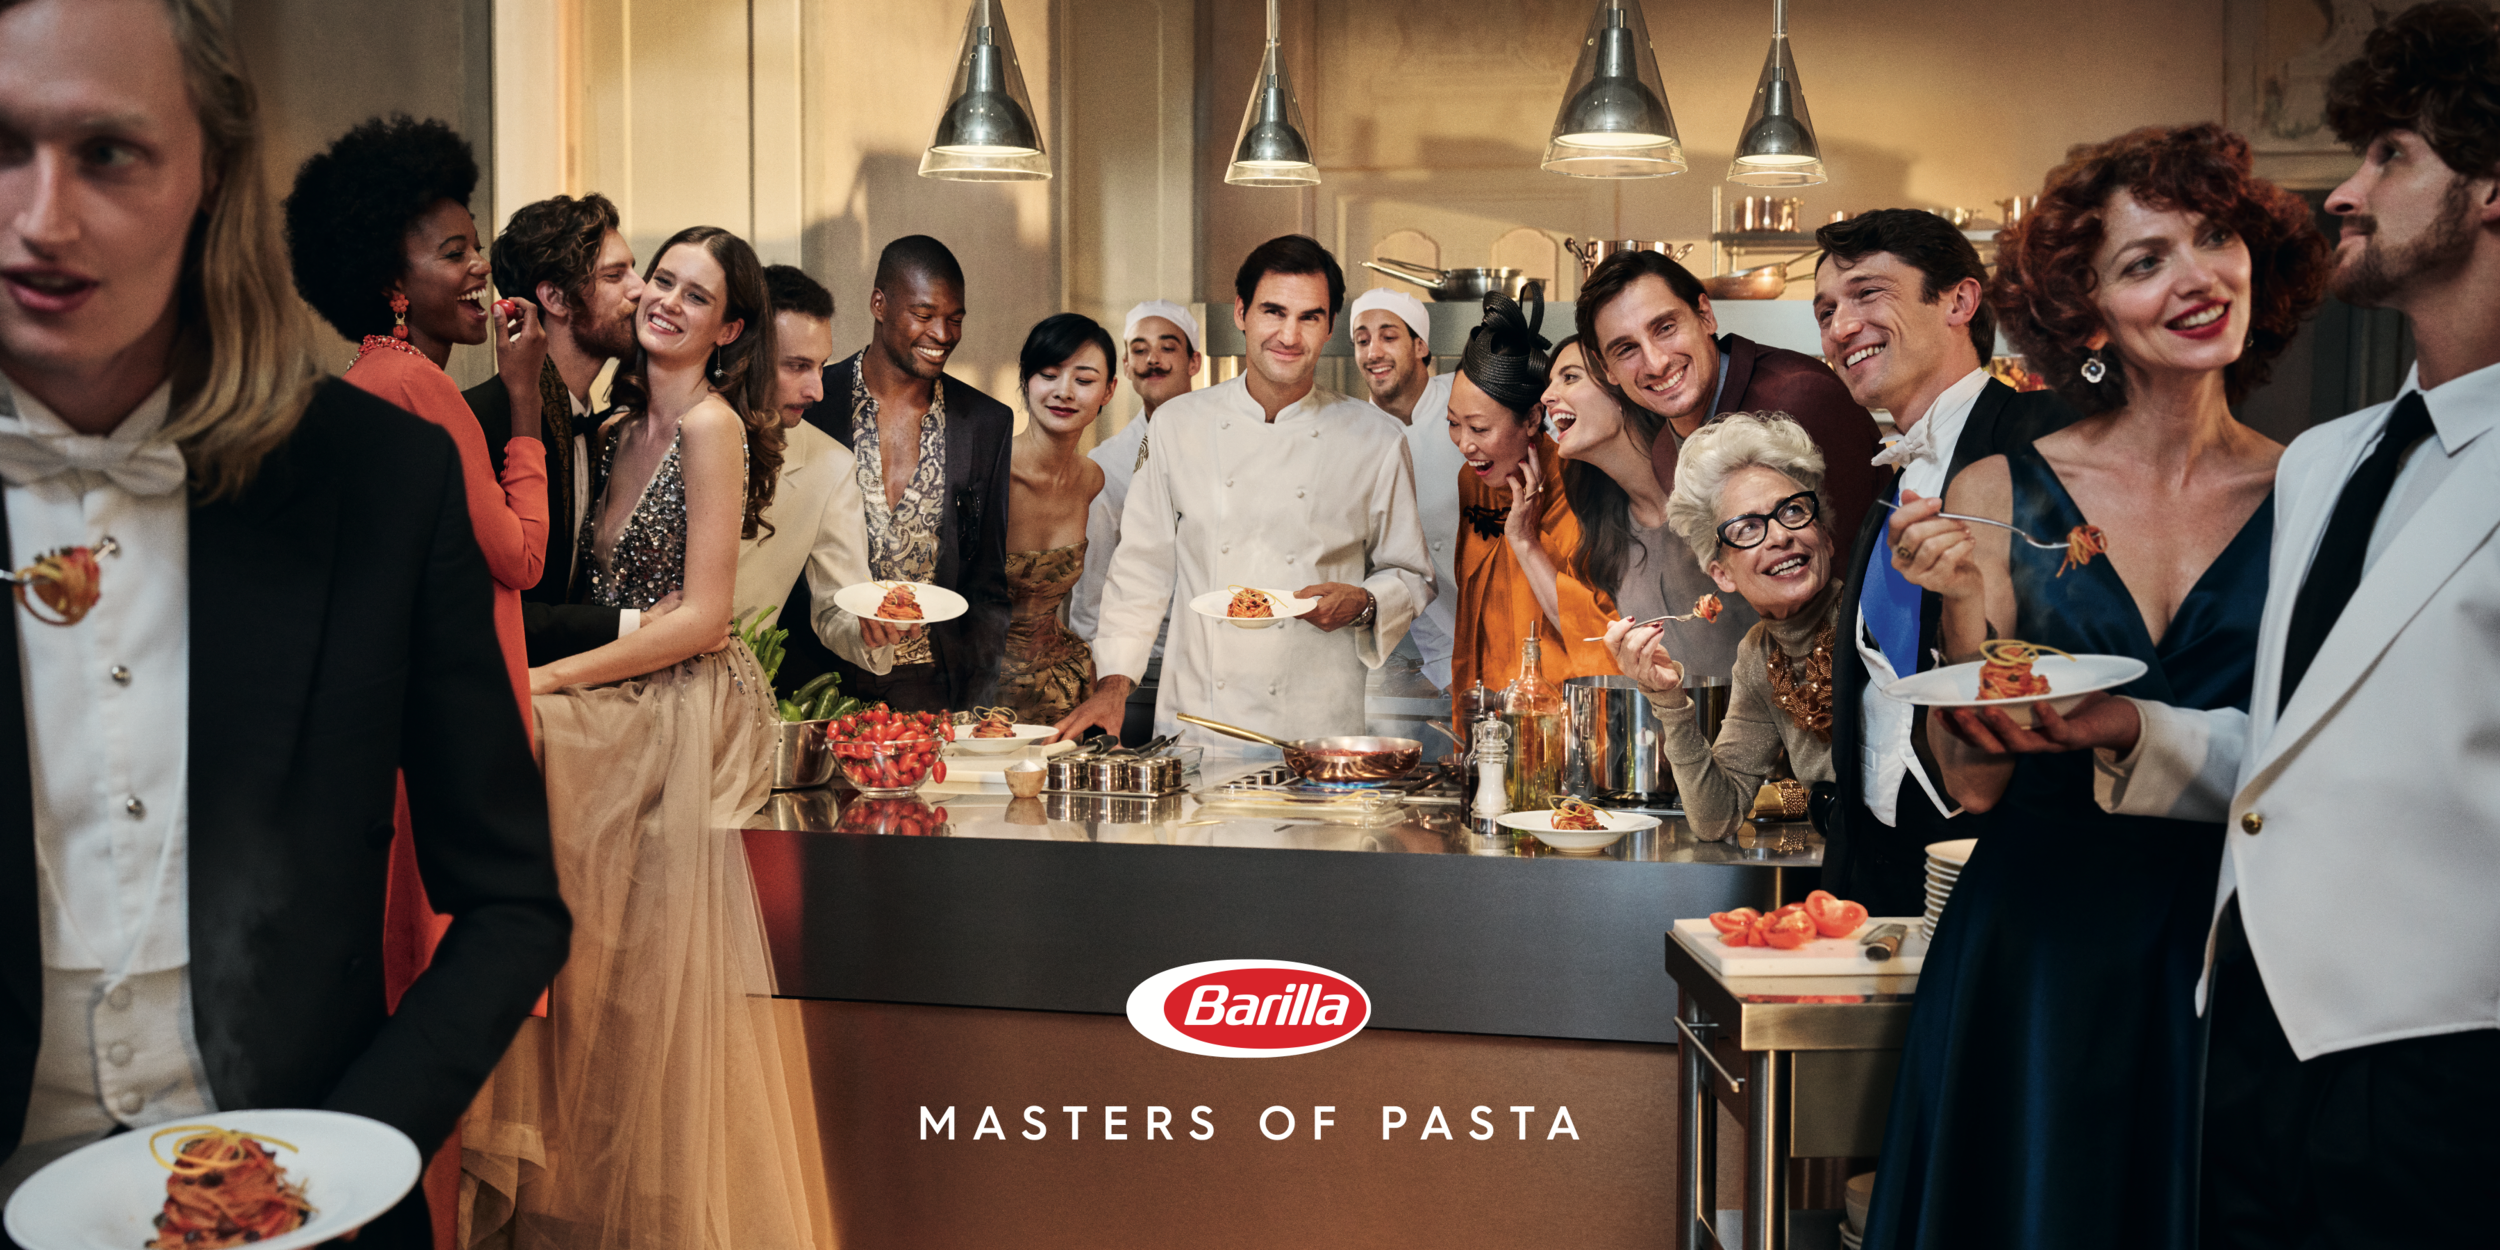 72NL_Barilla_The_Party_RF_48Sheet_KV2_Redelivery_1481.png